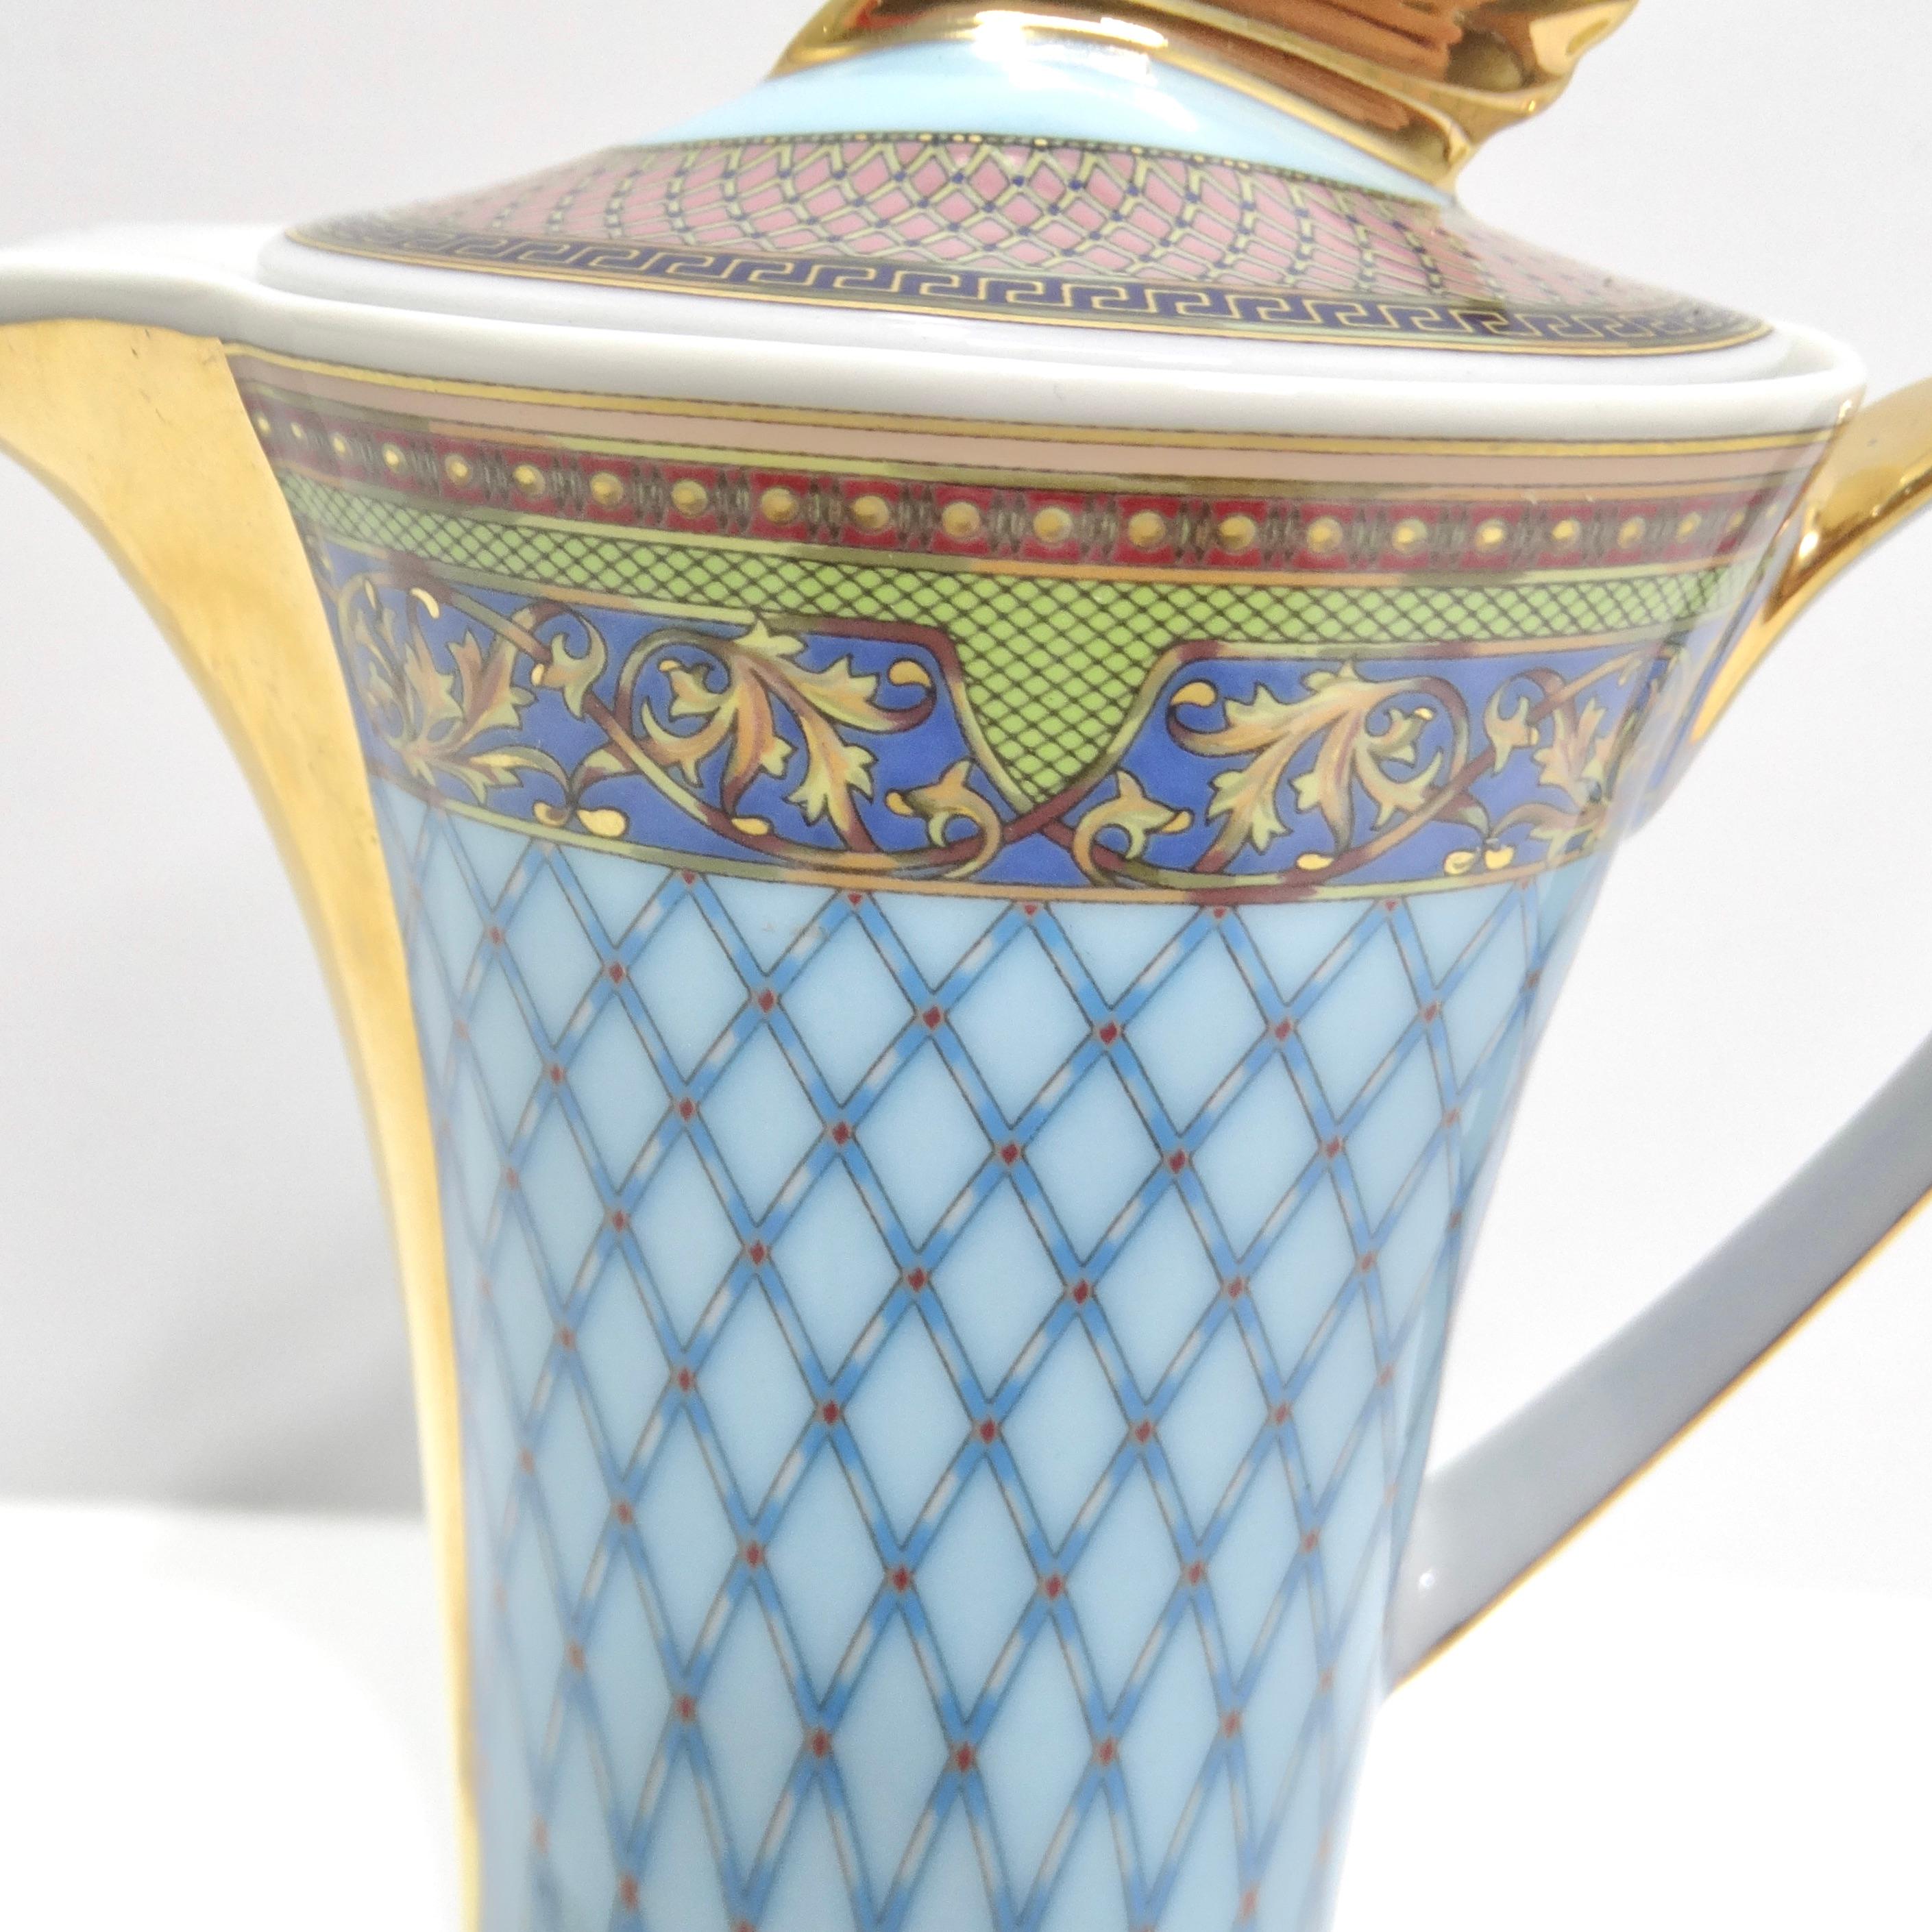 Introducing the Versace Rosenthal 1990s Russian Dream Coffee Pot – a stunning porcelain masterpiece that seamlessly blends opulence and artistry to bring a touch of luxury to your kitchen. With its captivating blue 'Russian Dream' design and